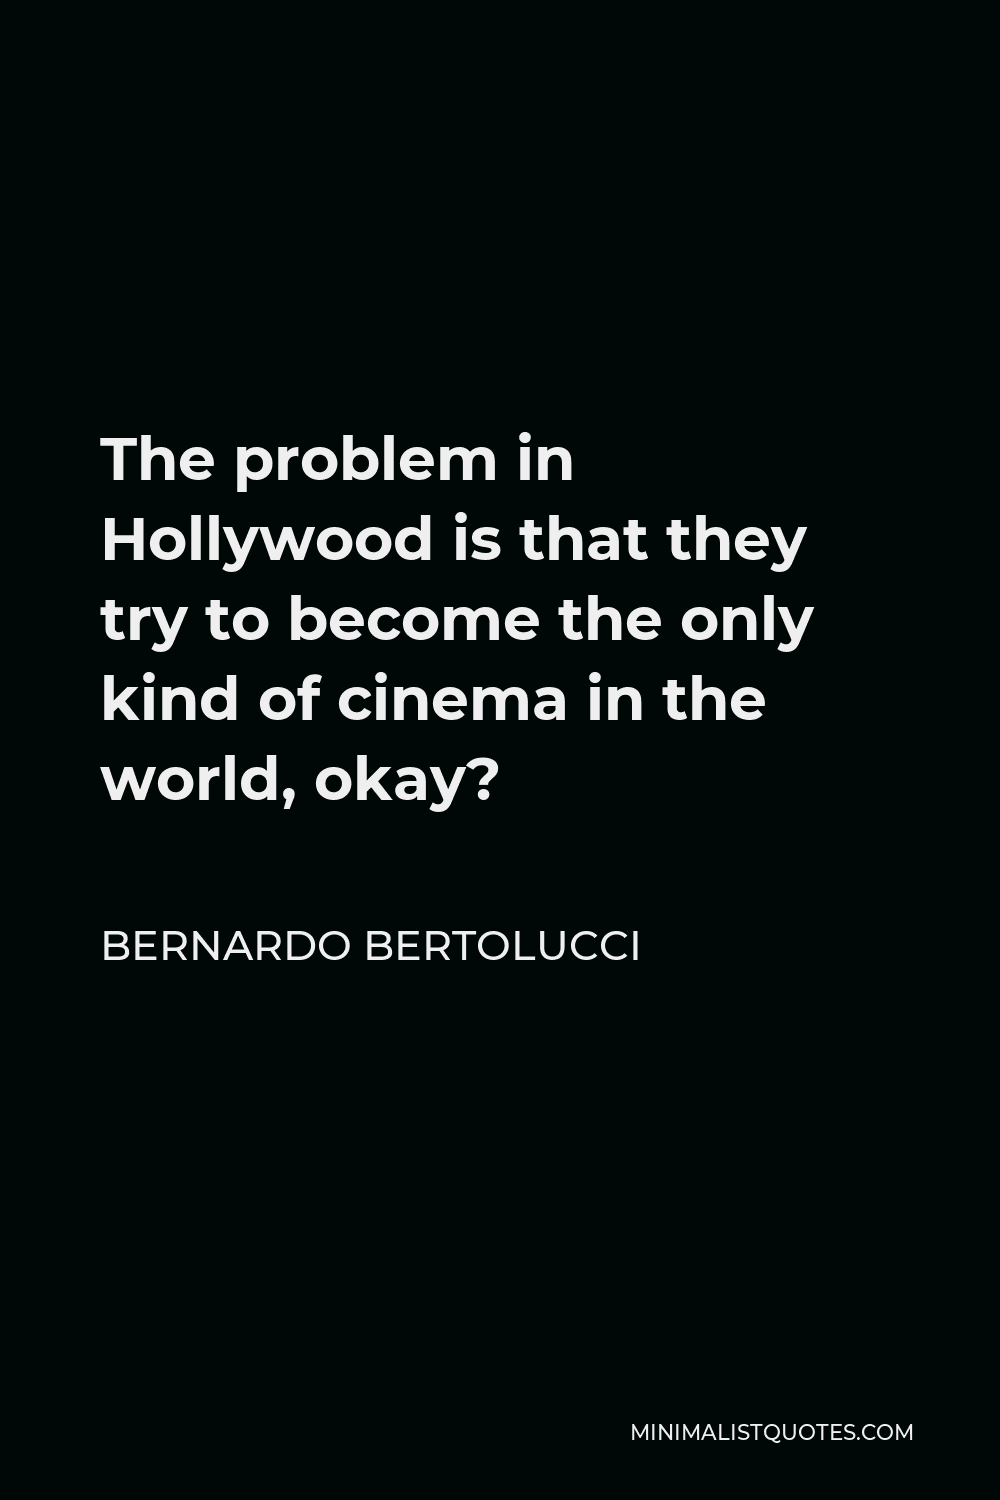 Bernardo Bertolucci Quote - The problem in Hollywood is that they try to become the only kind of cinema in the world, okay?